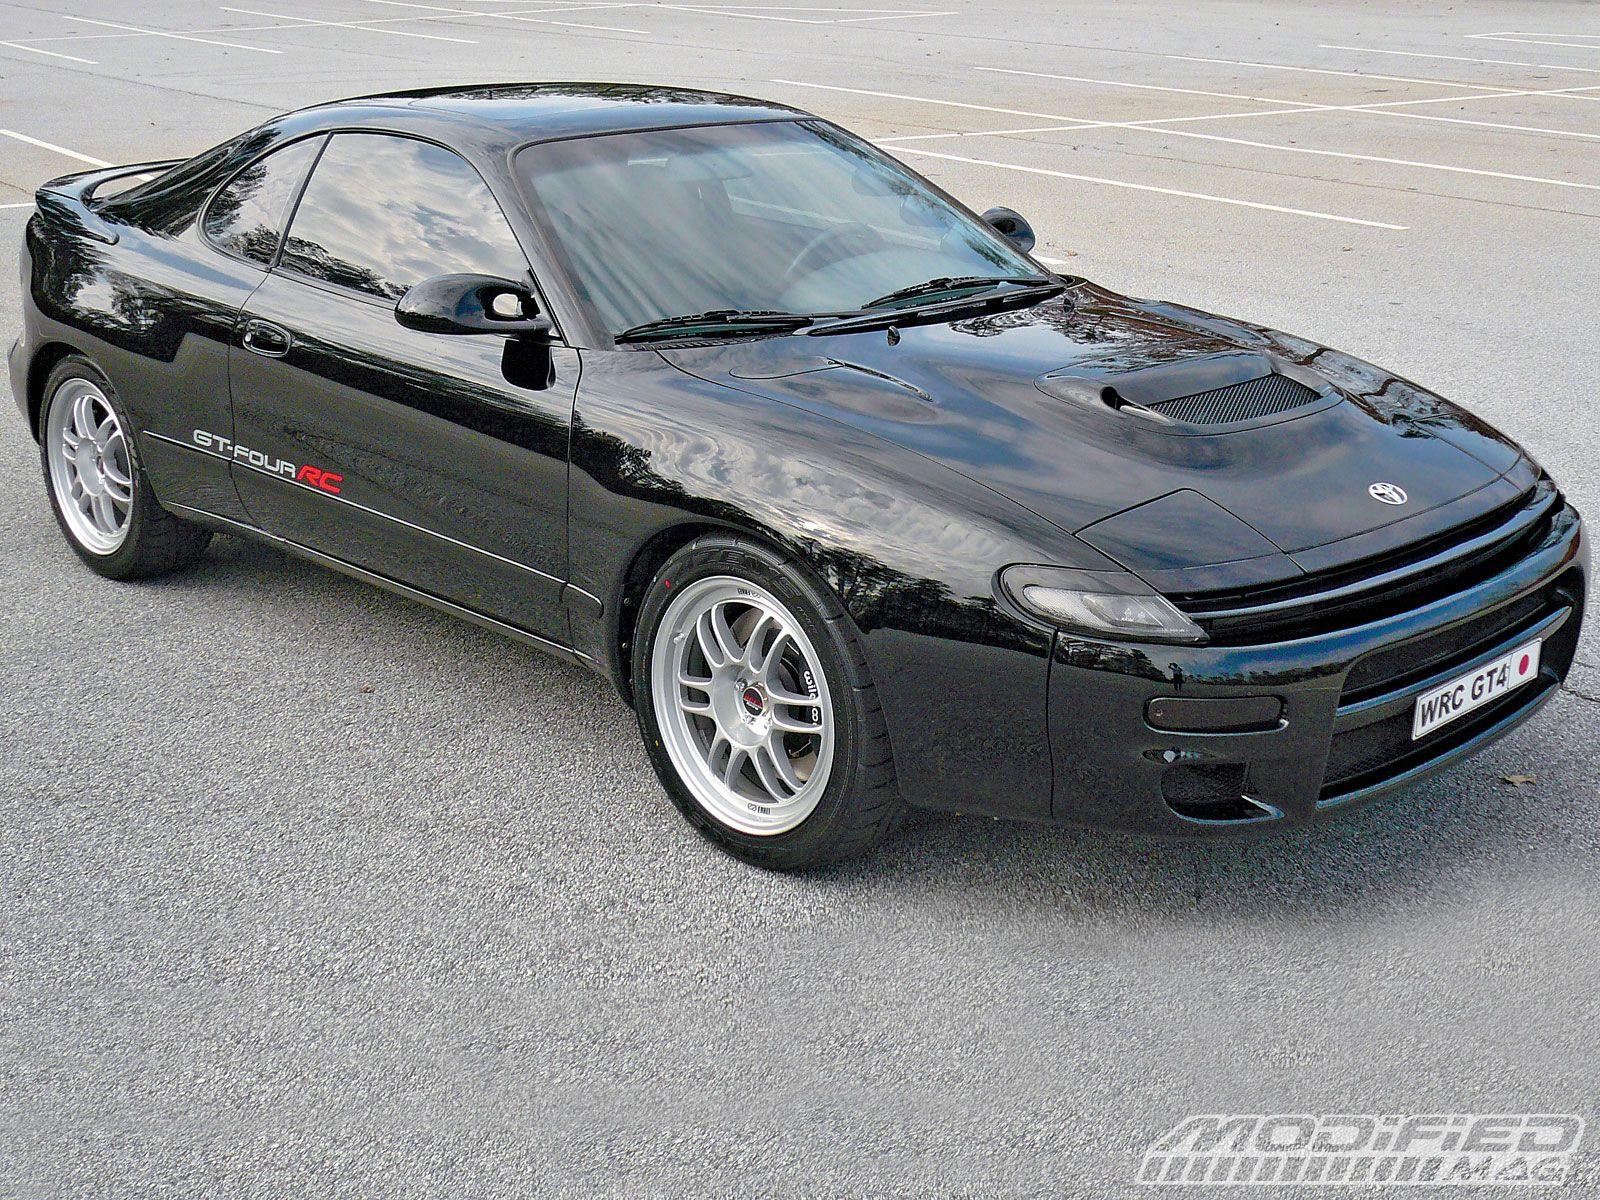 Toyota Celica, MkV, ST GT4 RC Limited Edition, only 5000 were